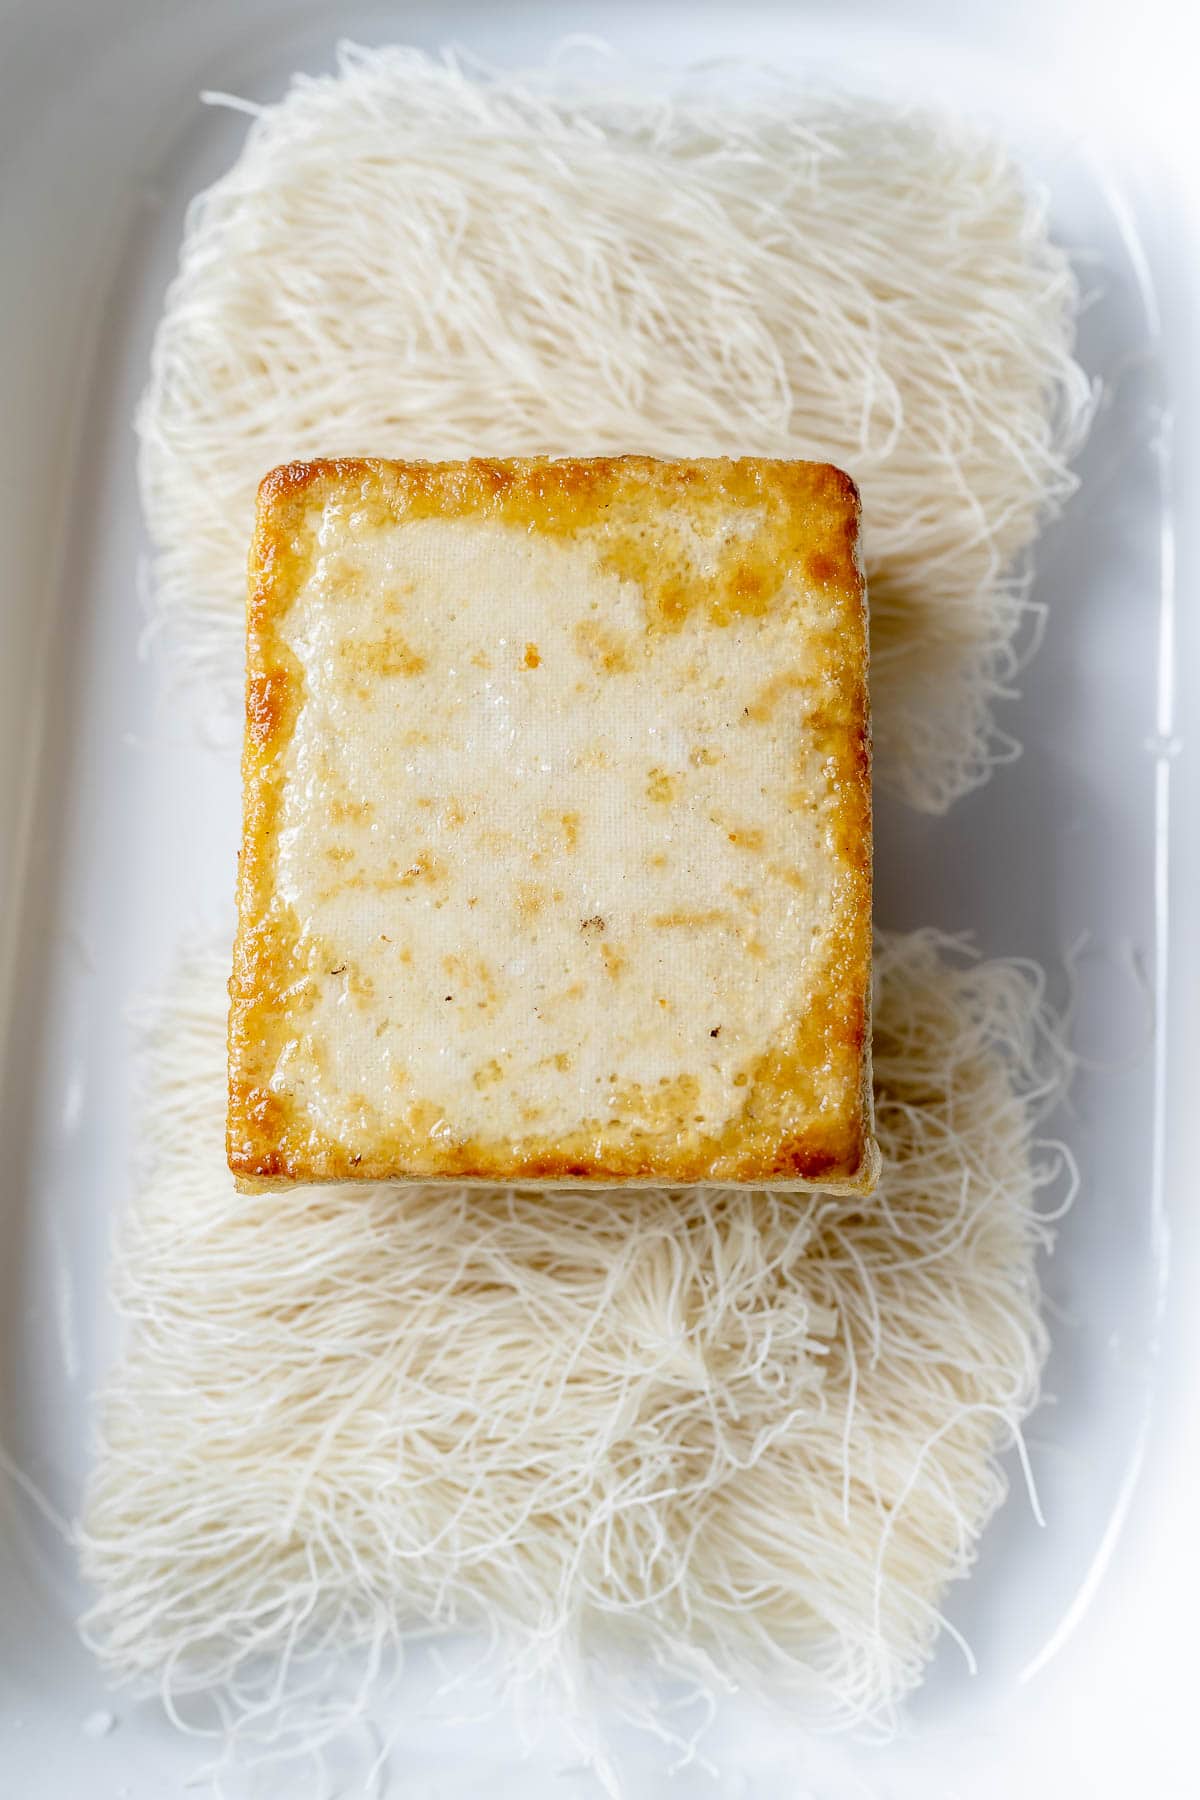 A golden block of tofu resting on dried noodle nests in a white baking dish.